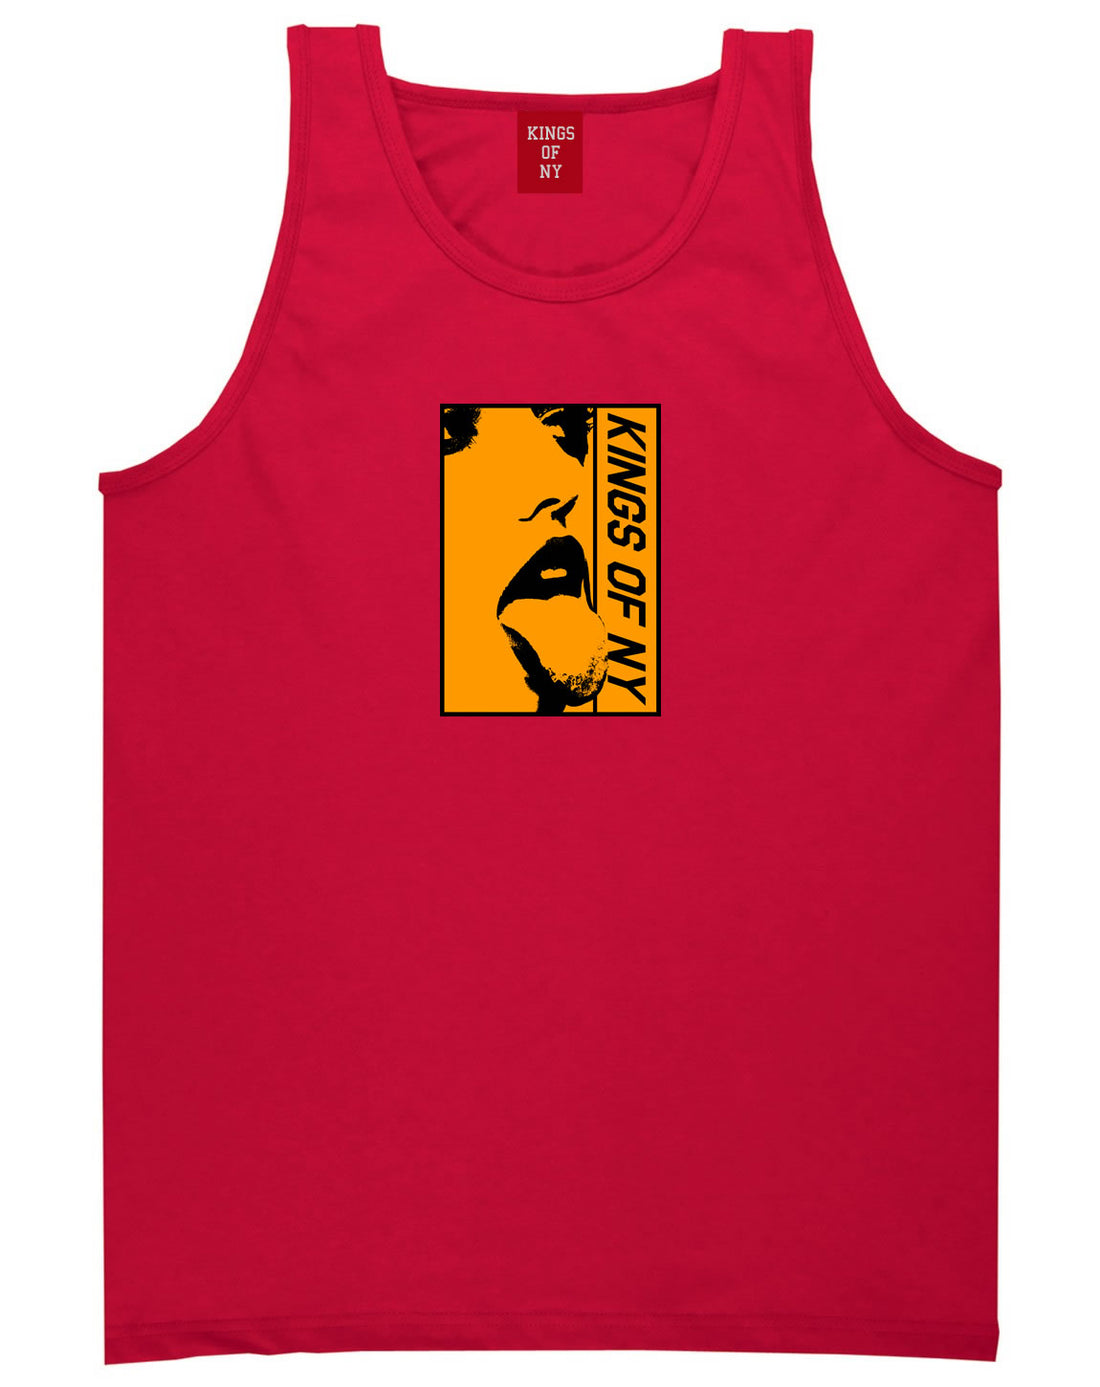 Open Minded Mens Tank Top Shirt Red